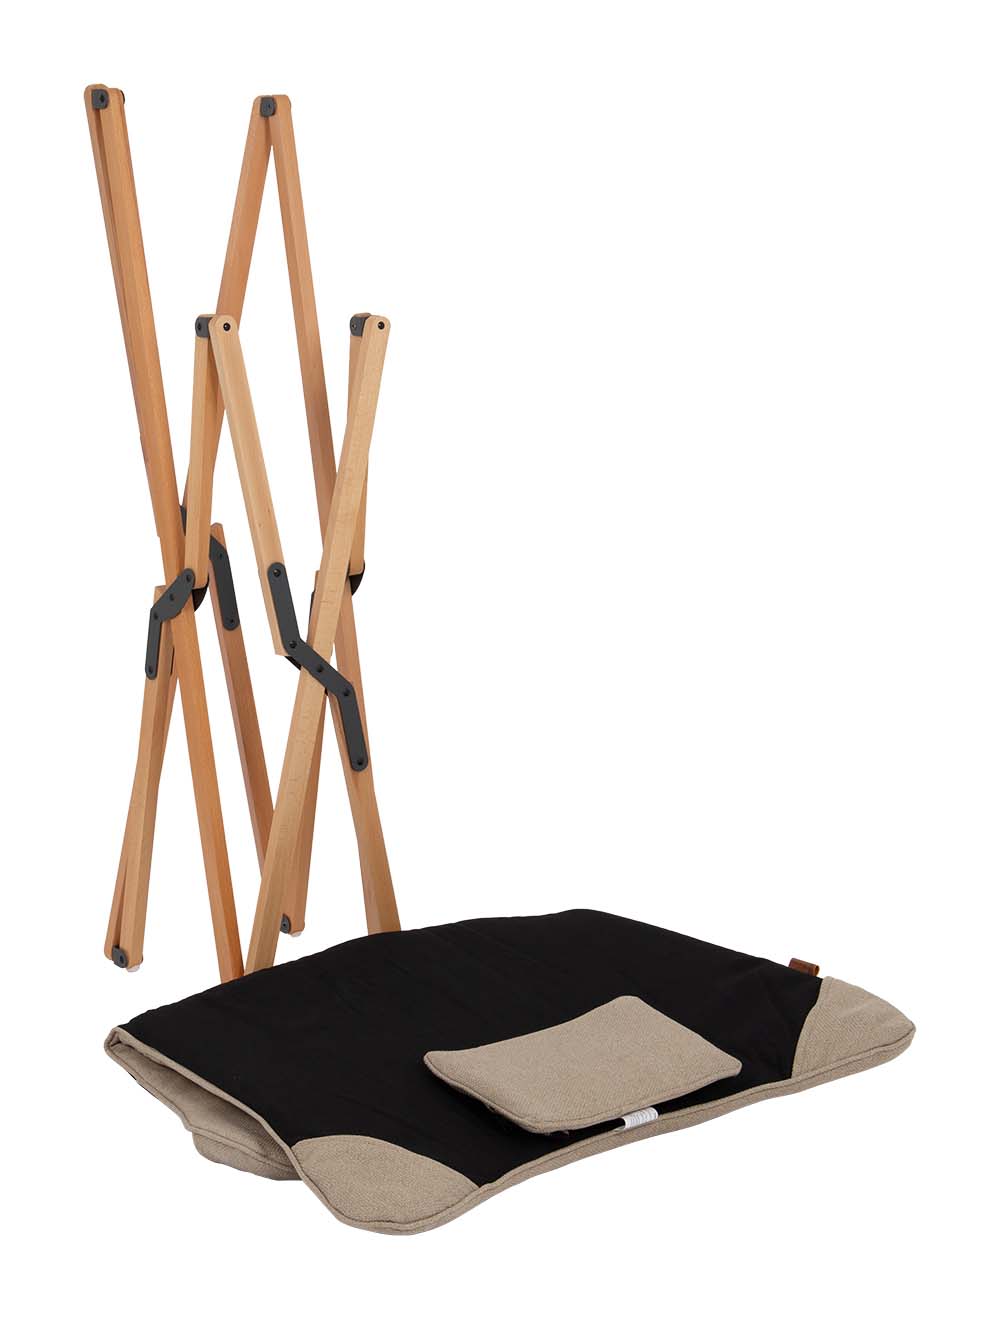 Bo-Camp - Urban Outdoor collection - Relaxstoel - Wembley - L - Nika - Beige detail 9